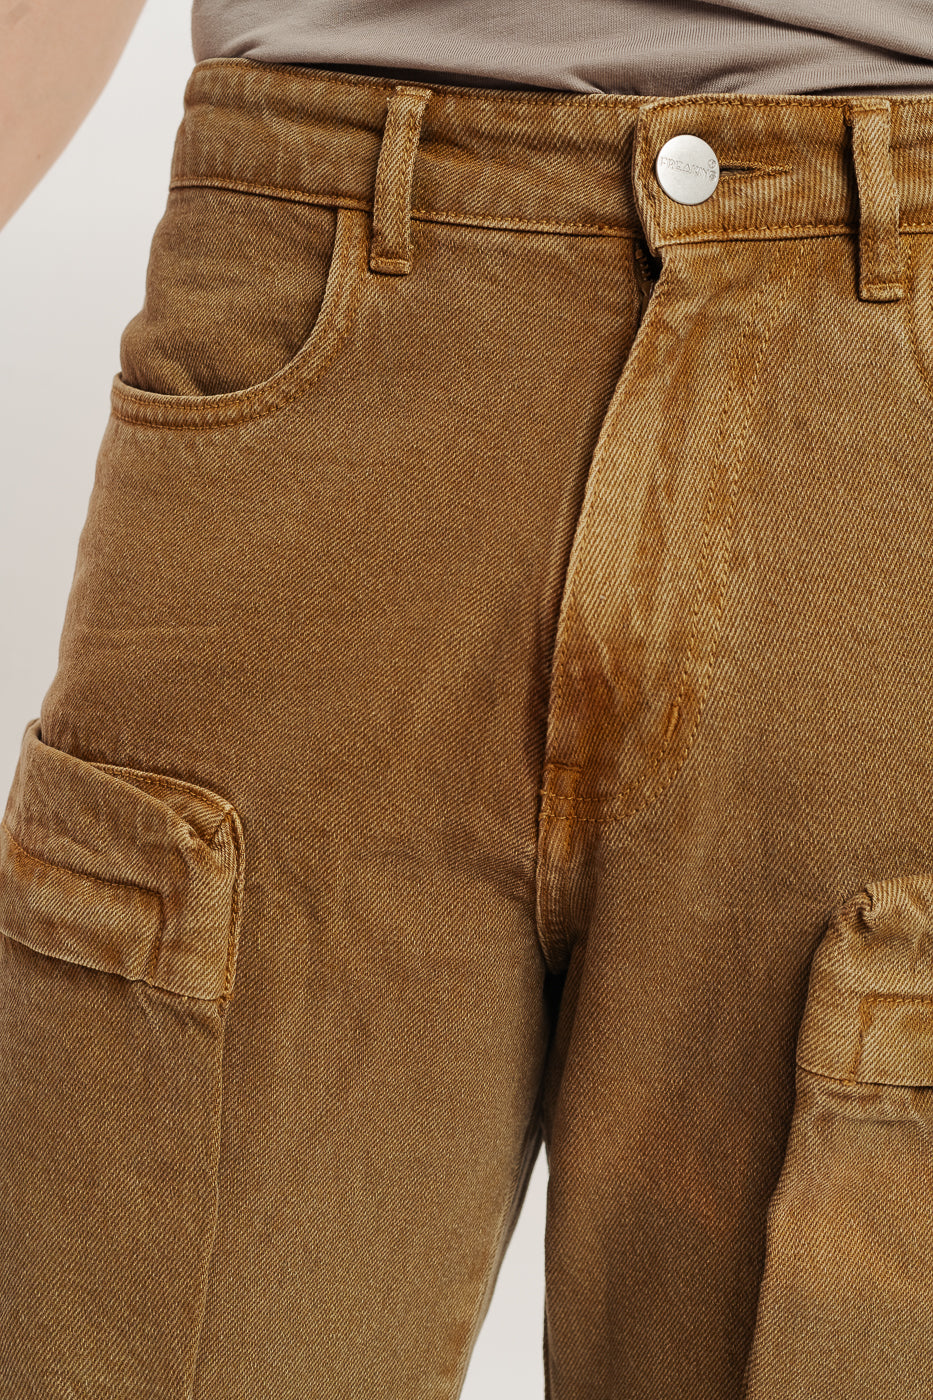 MEN'S BROWN STRAIGHT JEANS